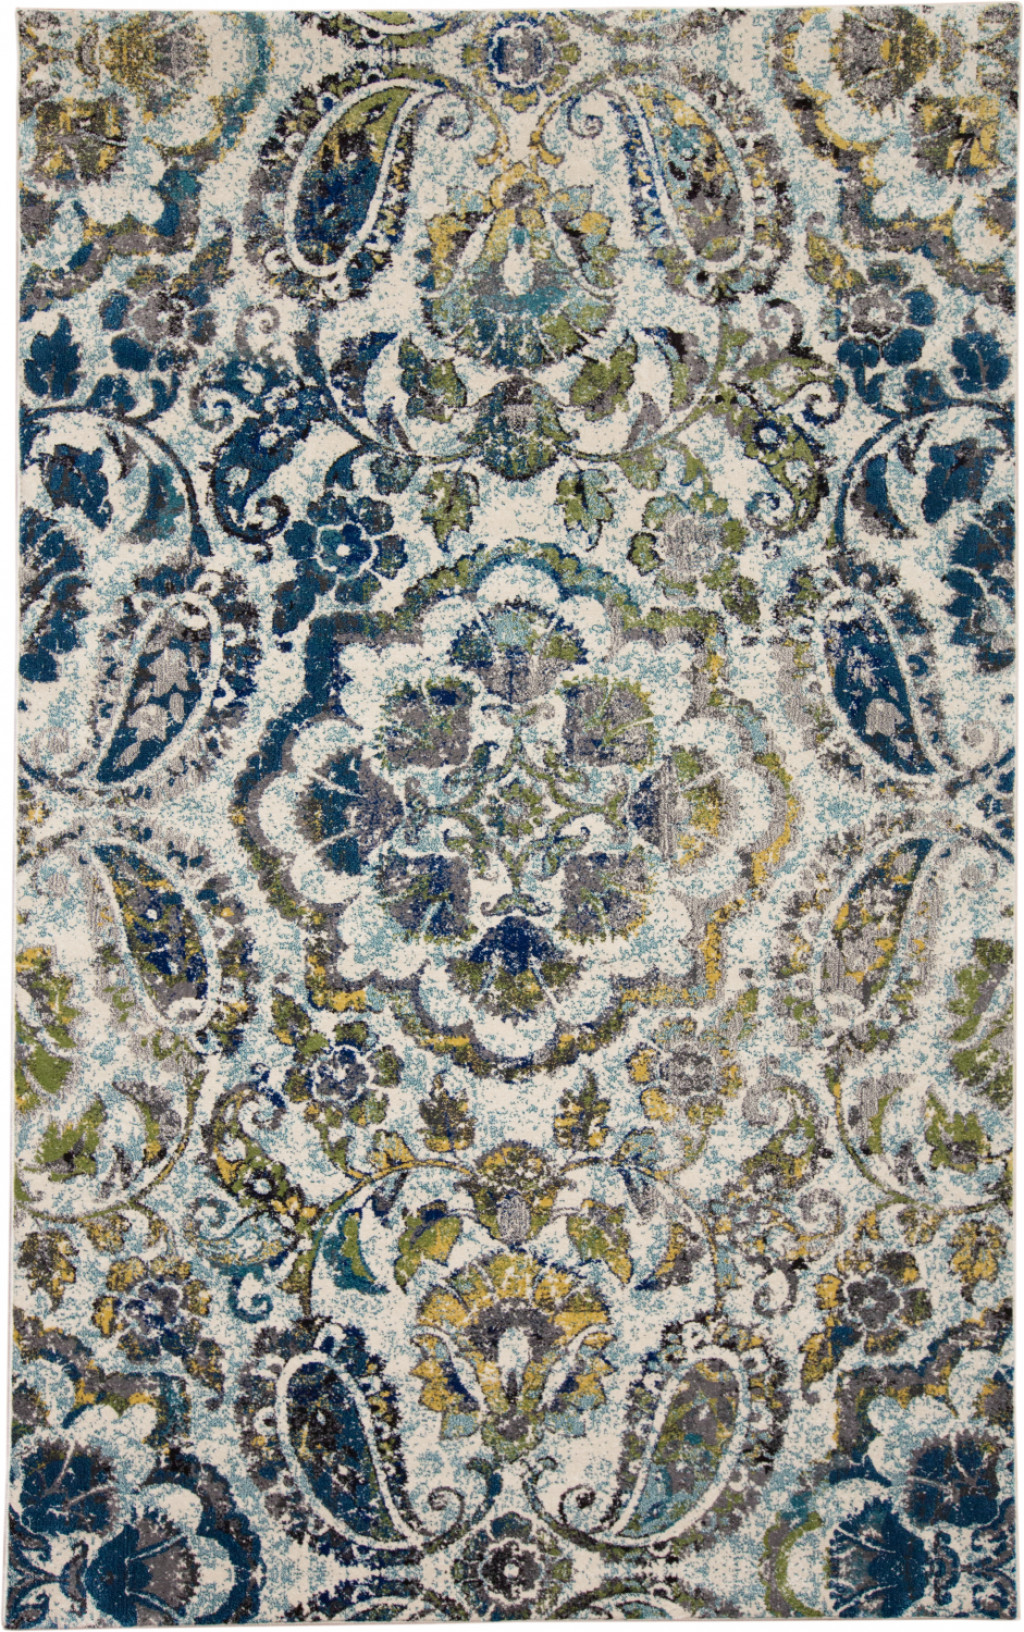 7' X 10' Ivory Blue And Green Floral Stain Resistant Area Rug-511144-1